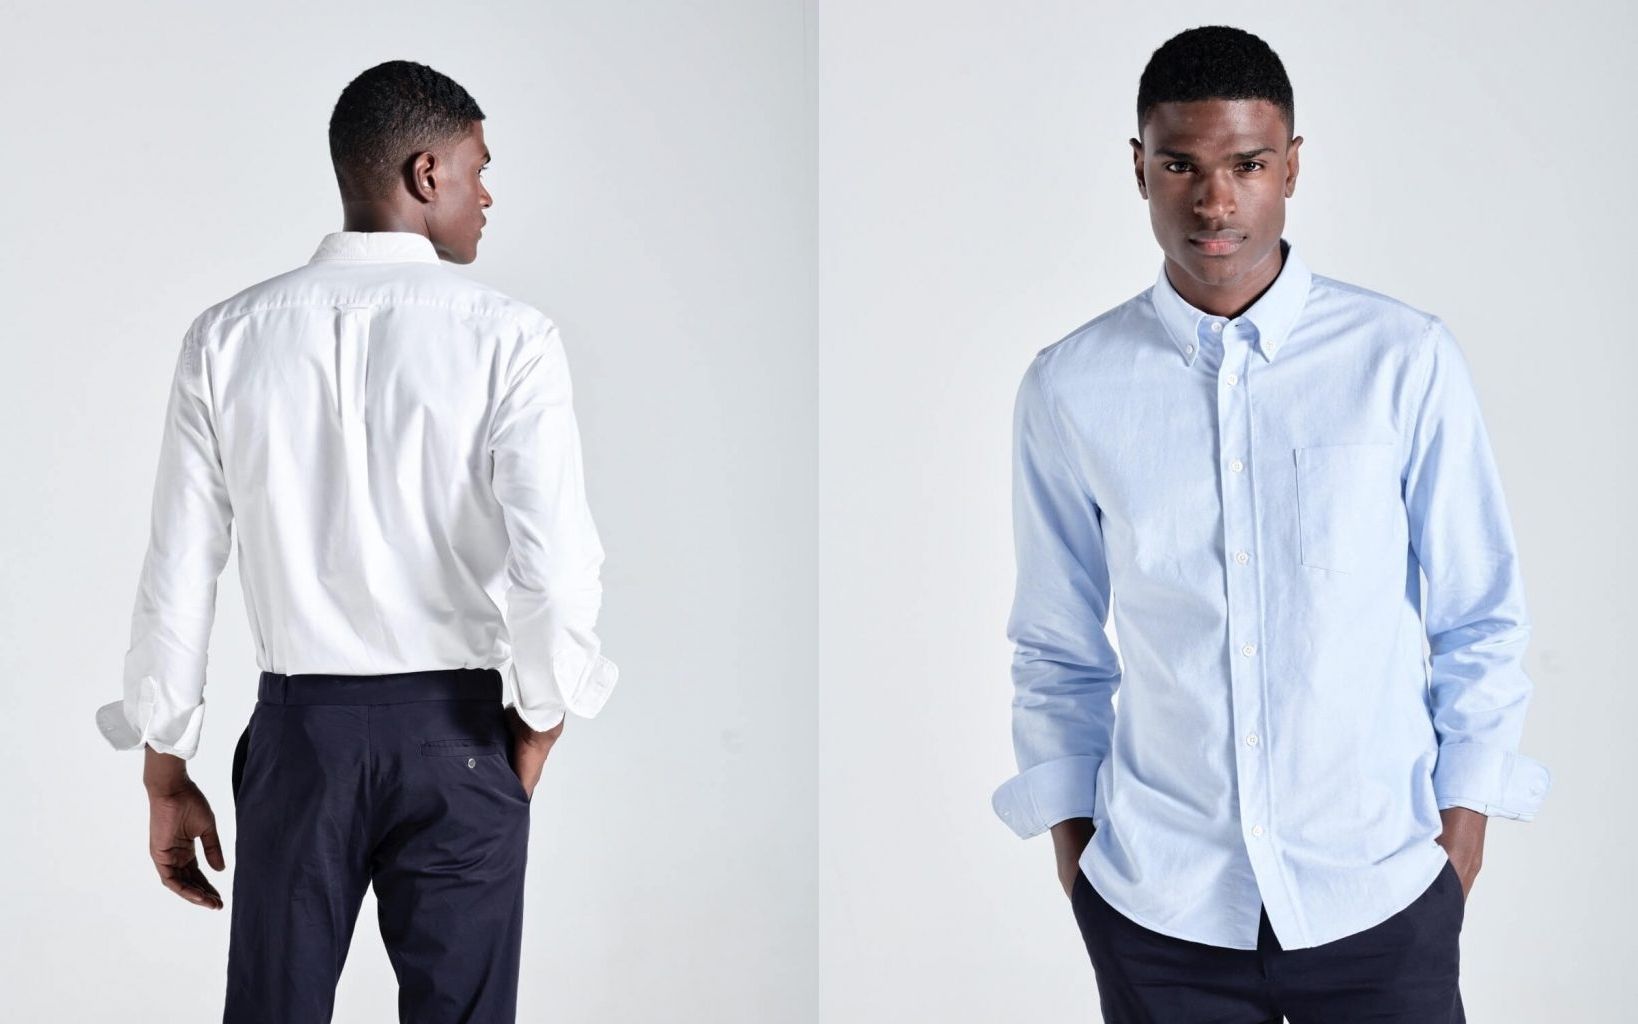 The History of the Oxford shirt: From the british elite to casual Friday